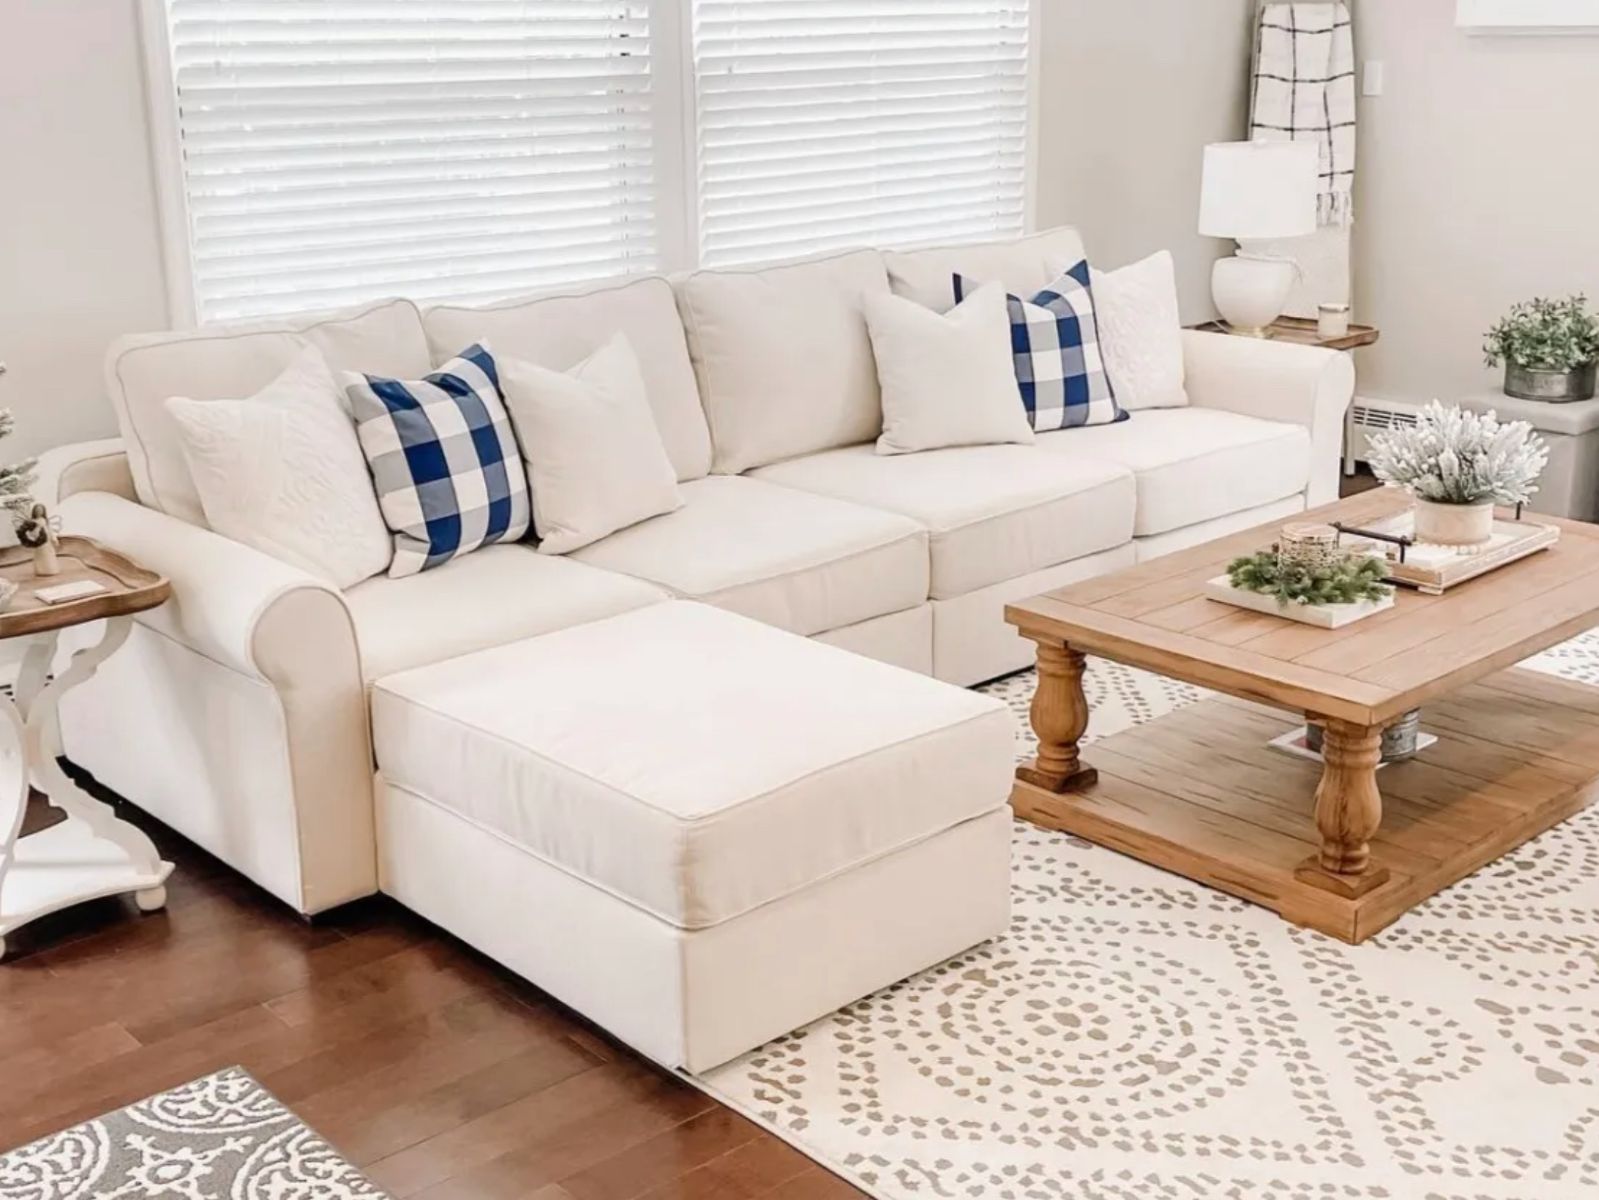 A cream chaise sectional from Lovesac is surrounded by traditional home furnishings including a farmhouse style coffee table, blue and white gingham throw pillows, and an abstract area rug.    